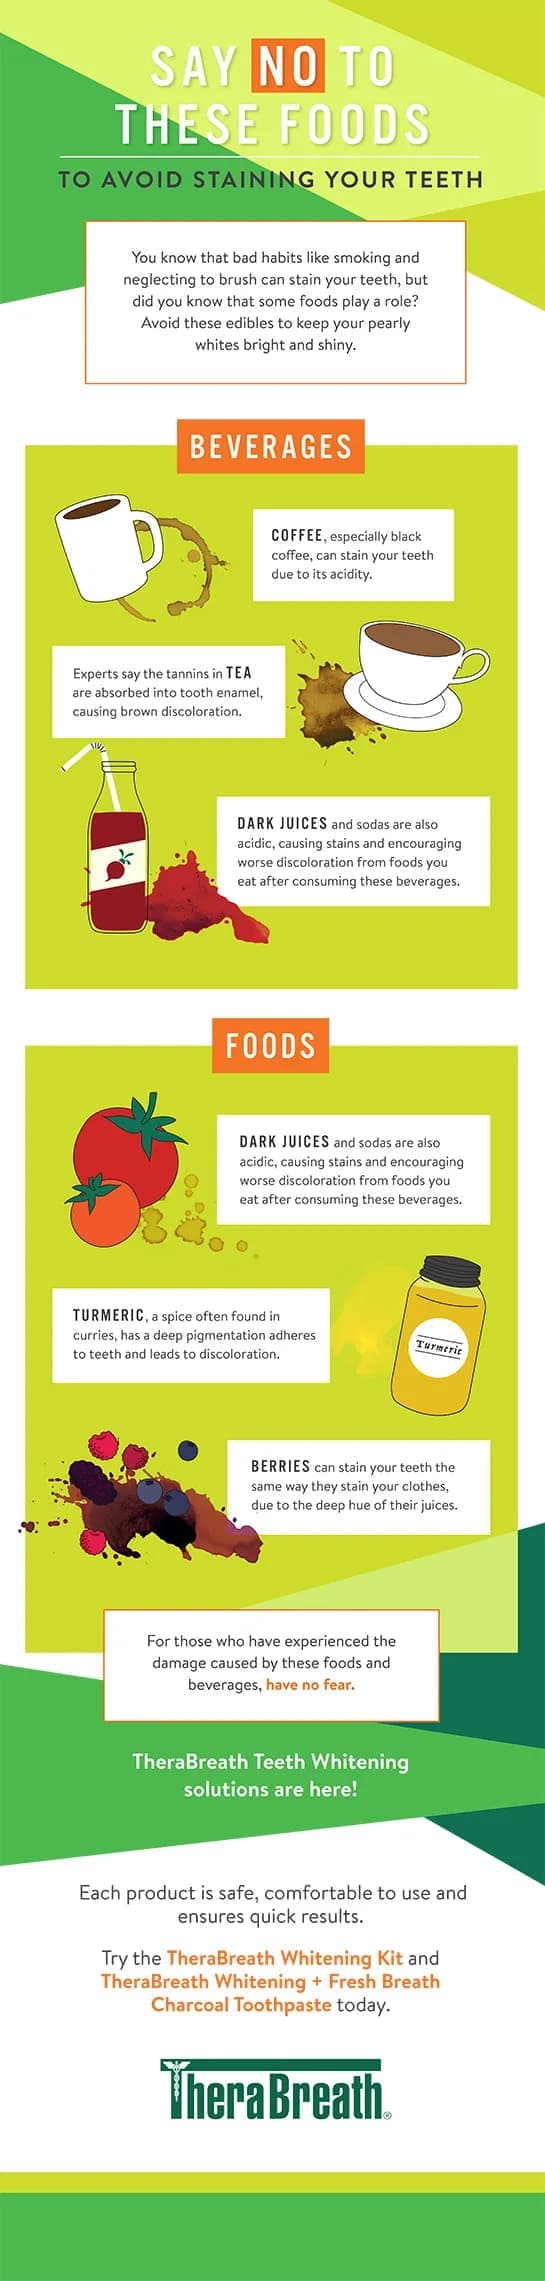 Full-size image of the Say No to These Foods to Avoid Staining Your Teeth infographic